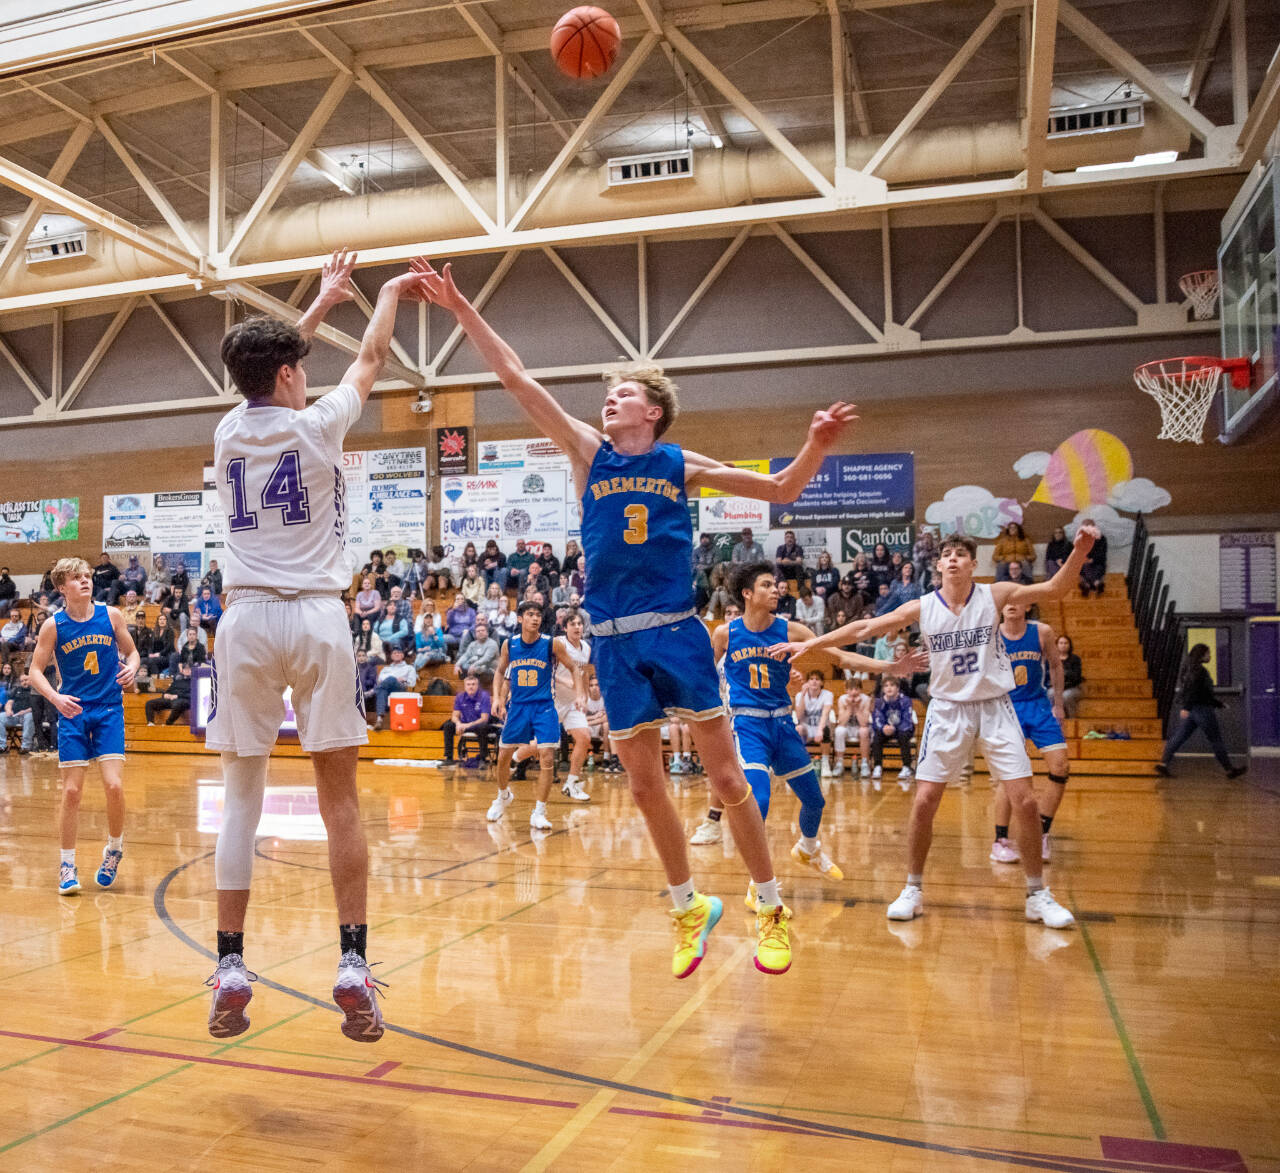 Sequim Gazette photo by Emily Matthiessen
Sequim’s Vince Carrizosa, left, launches a 3-pointer over Bremerton’s Giovanni Lowe in the Wolves’ 60-49 win over the visiting Knights on Jan. 17. Carrizosa led Sequim with 14 points, sinking three 3-pointers in the third quarter.